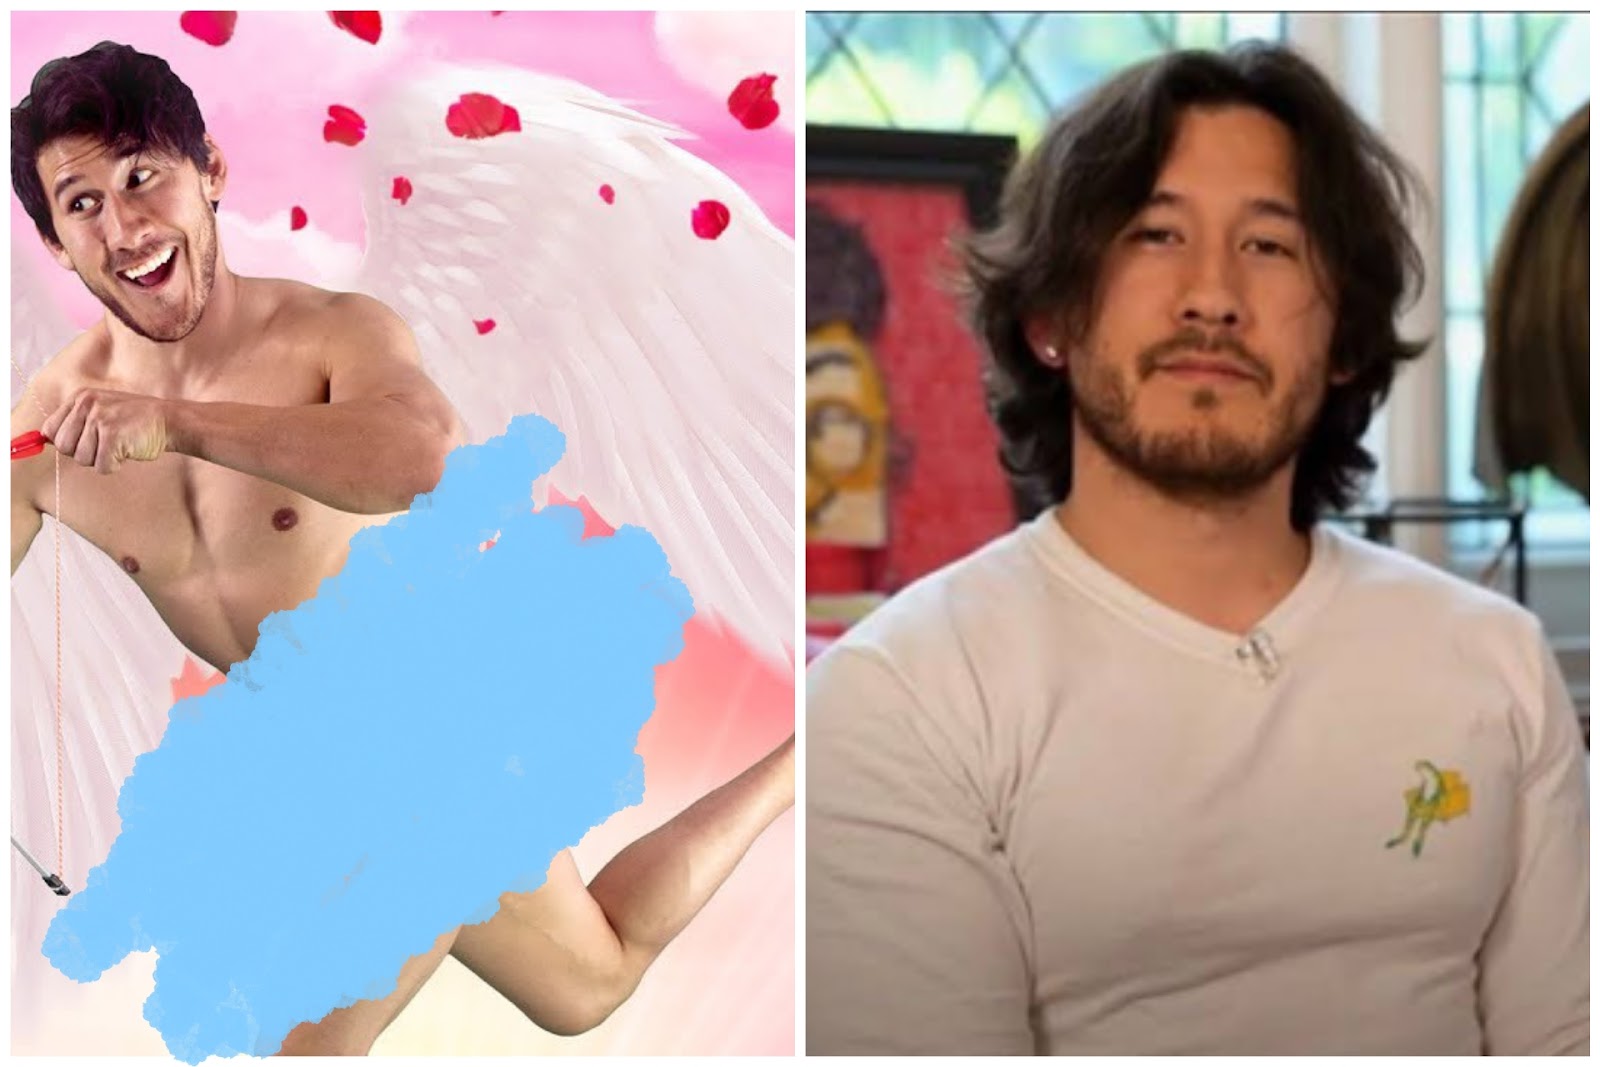 How Much Did Markiplier Make Off Onlyfans